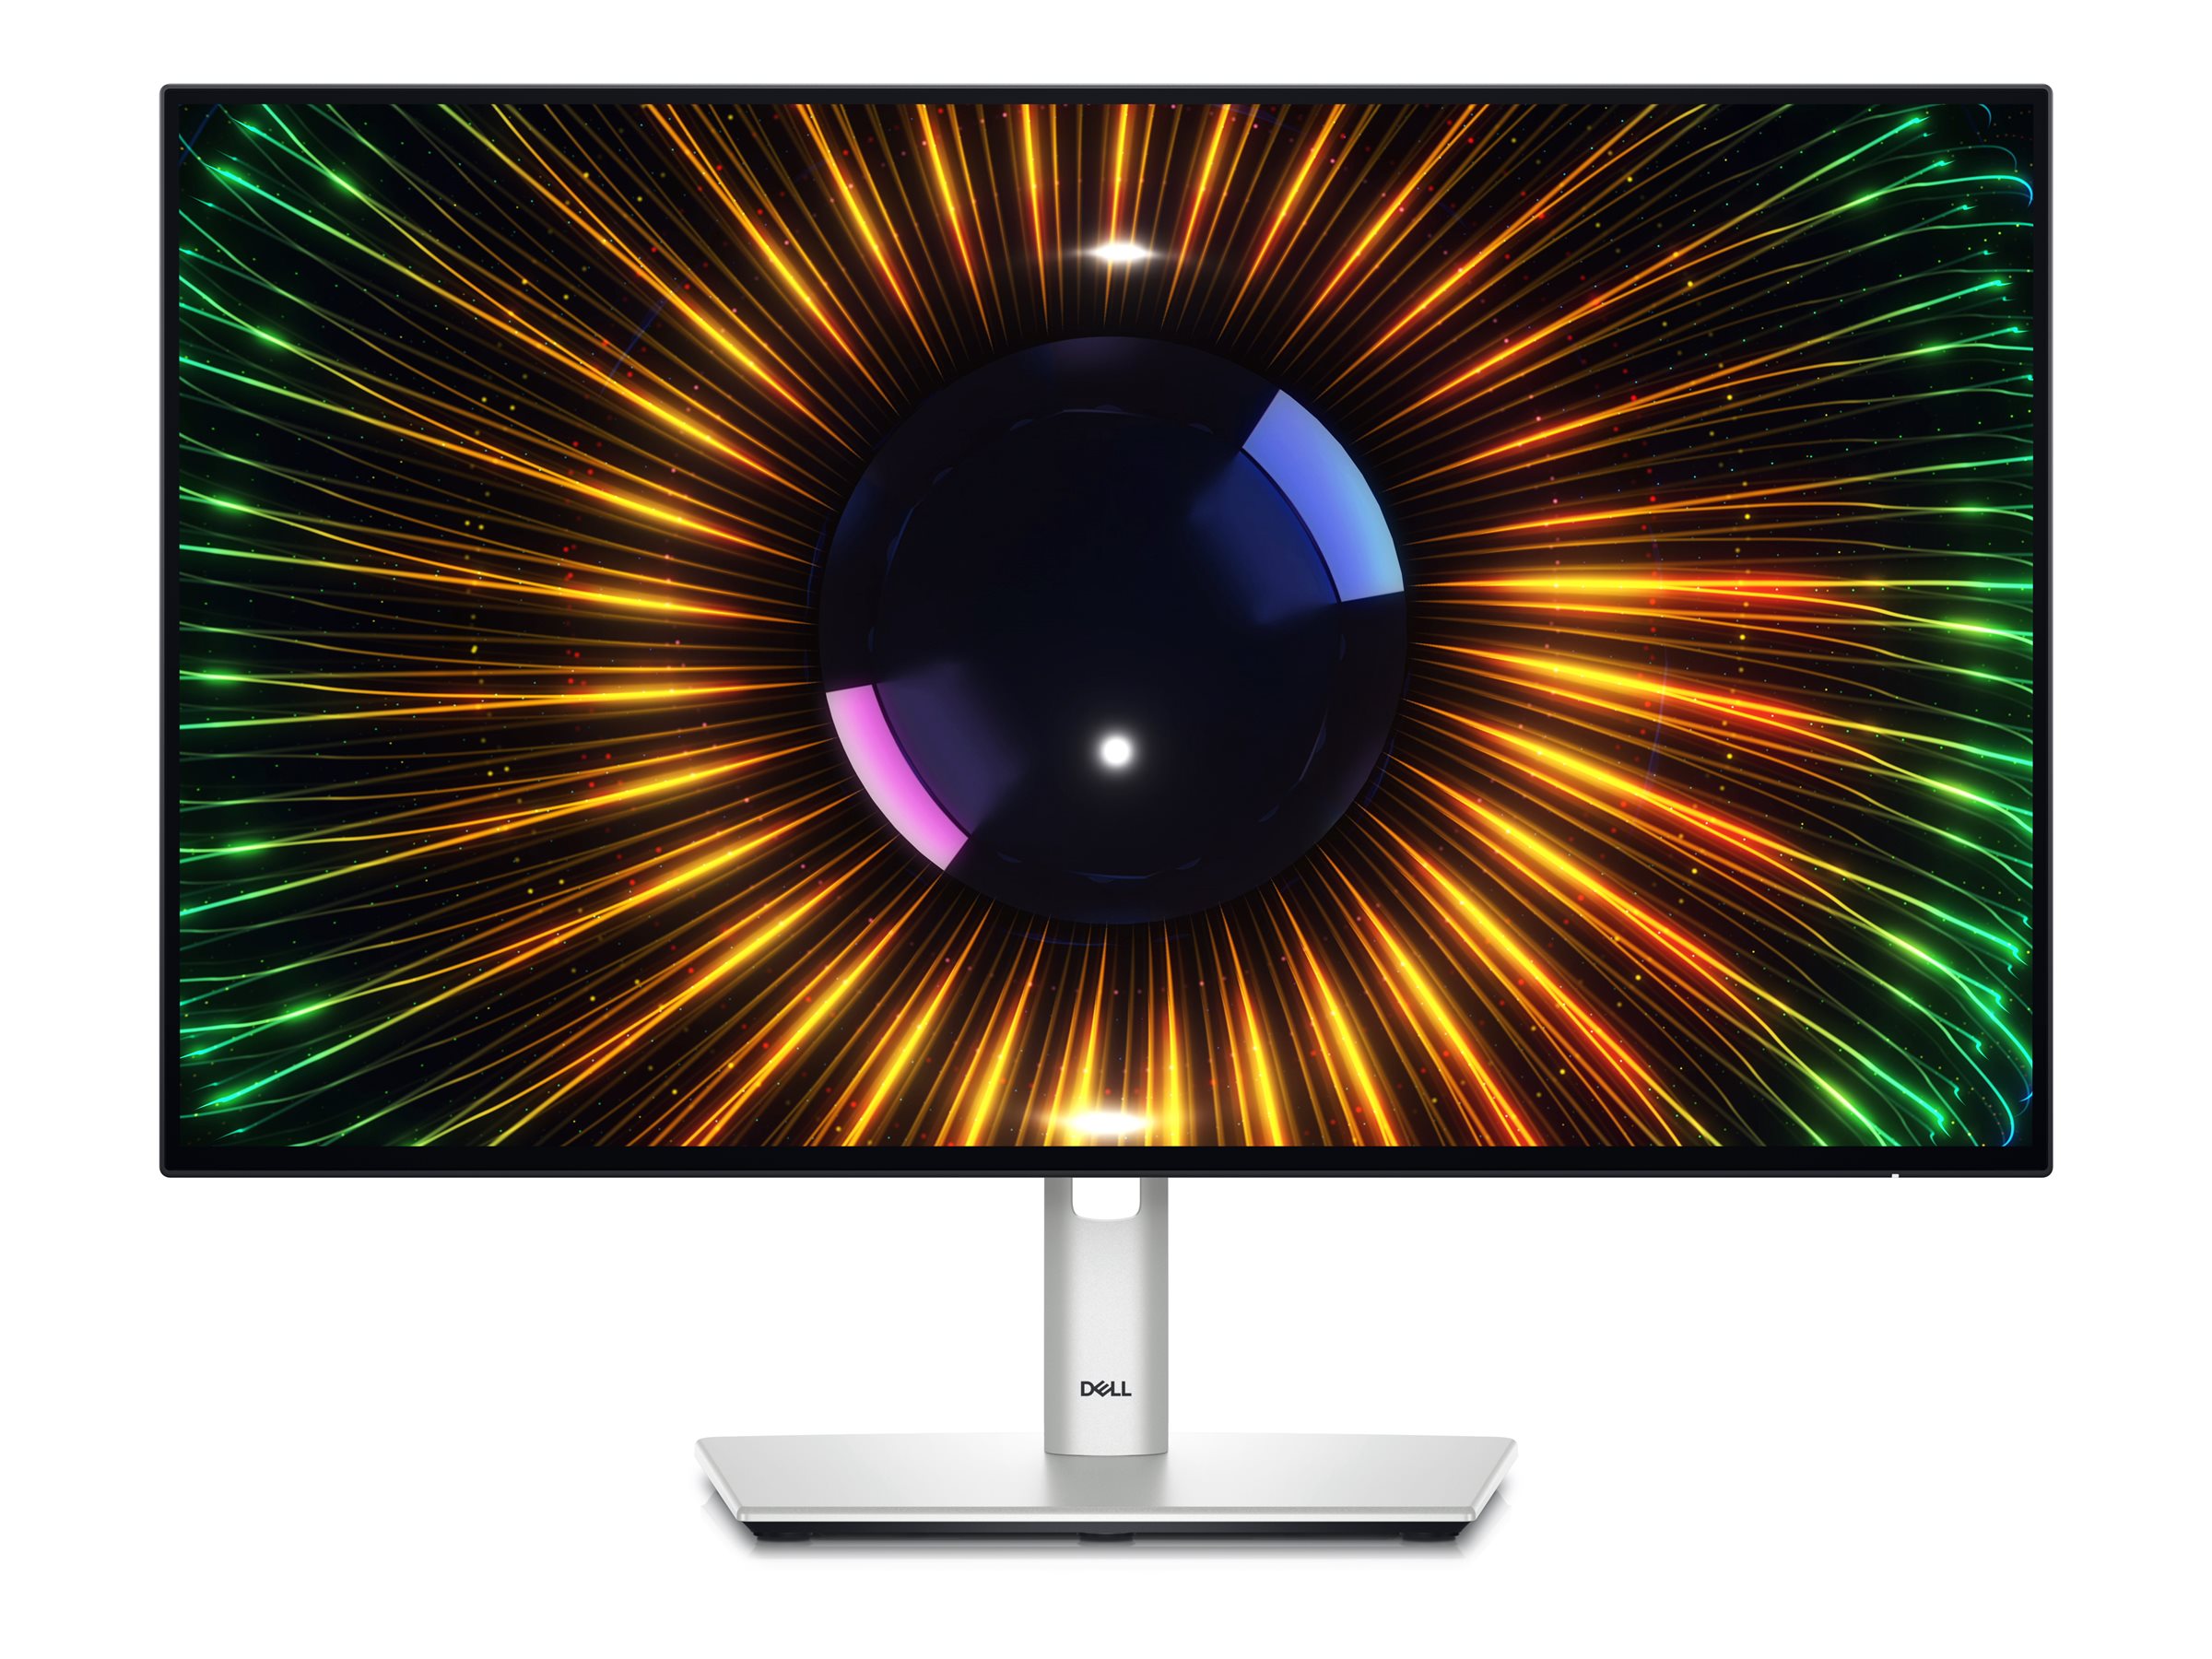 DELL UltraSharp 24 Monitor U2424H 60,47cm 23,8Zoll IPS 1920x1080 120Hz 16:9 250cd/m2 HDMI DP USB-C without stand